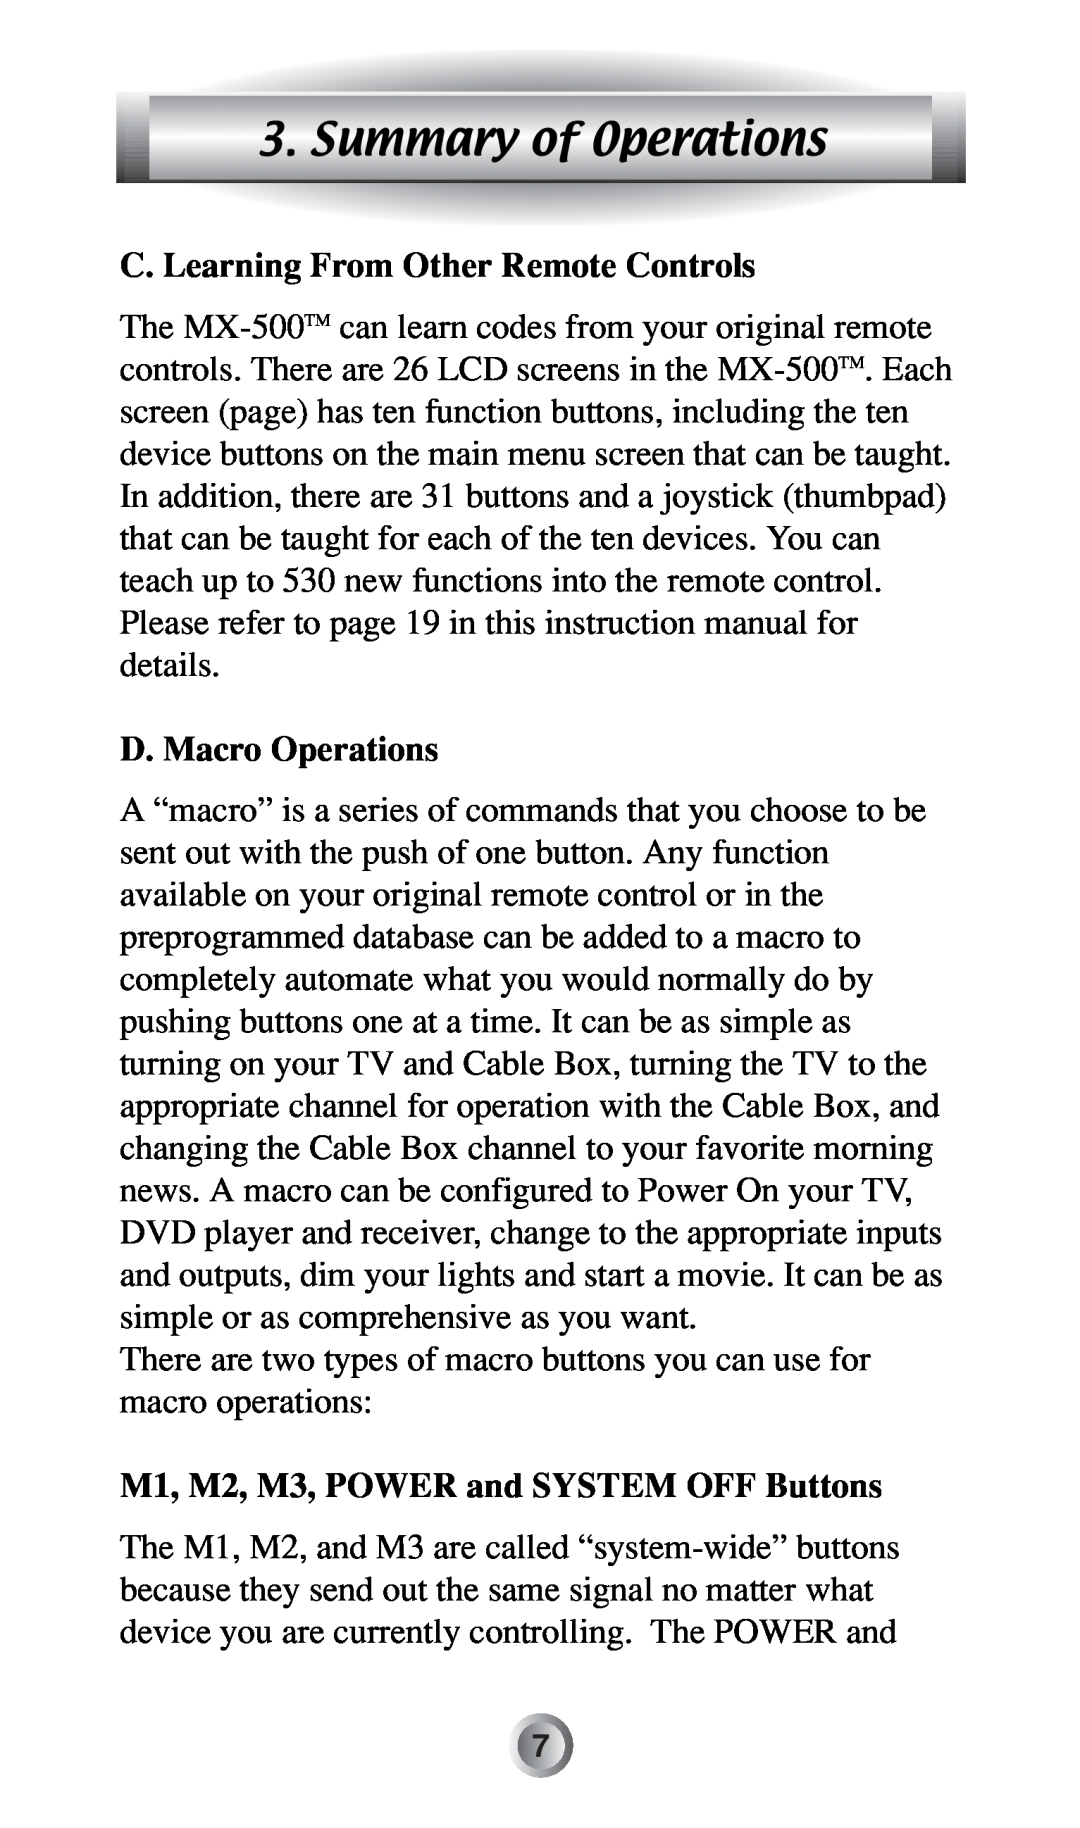 Radio Shack MX-500TM manual Summary of Operations, C. Learning From Other Remote Controls, D. Macro Operations 